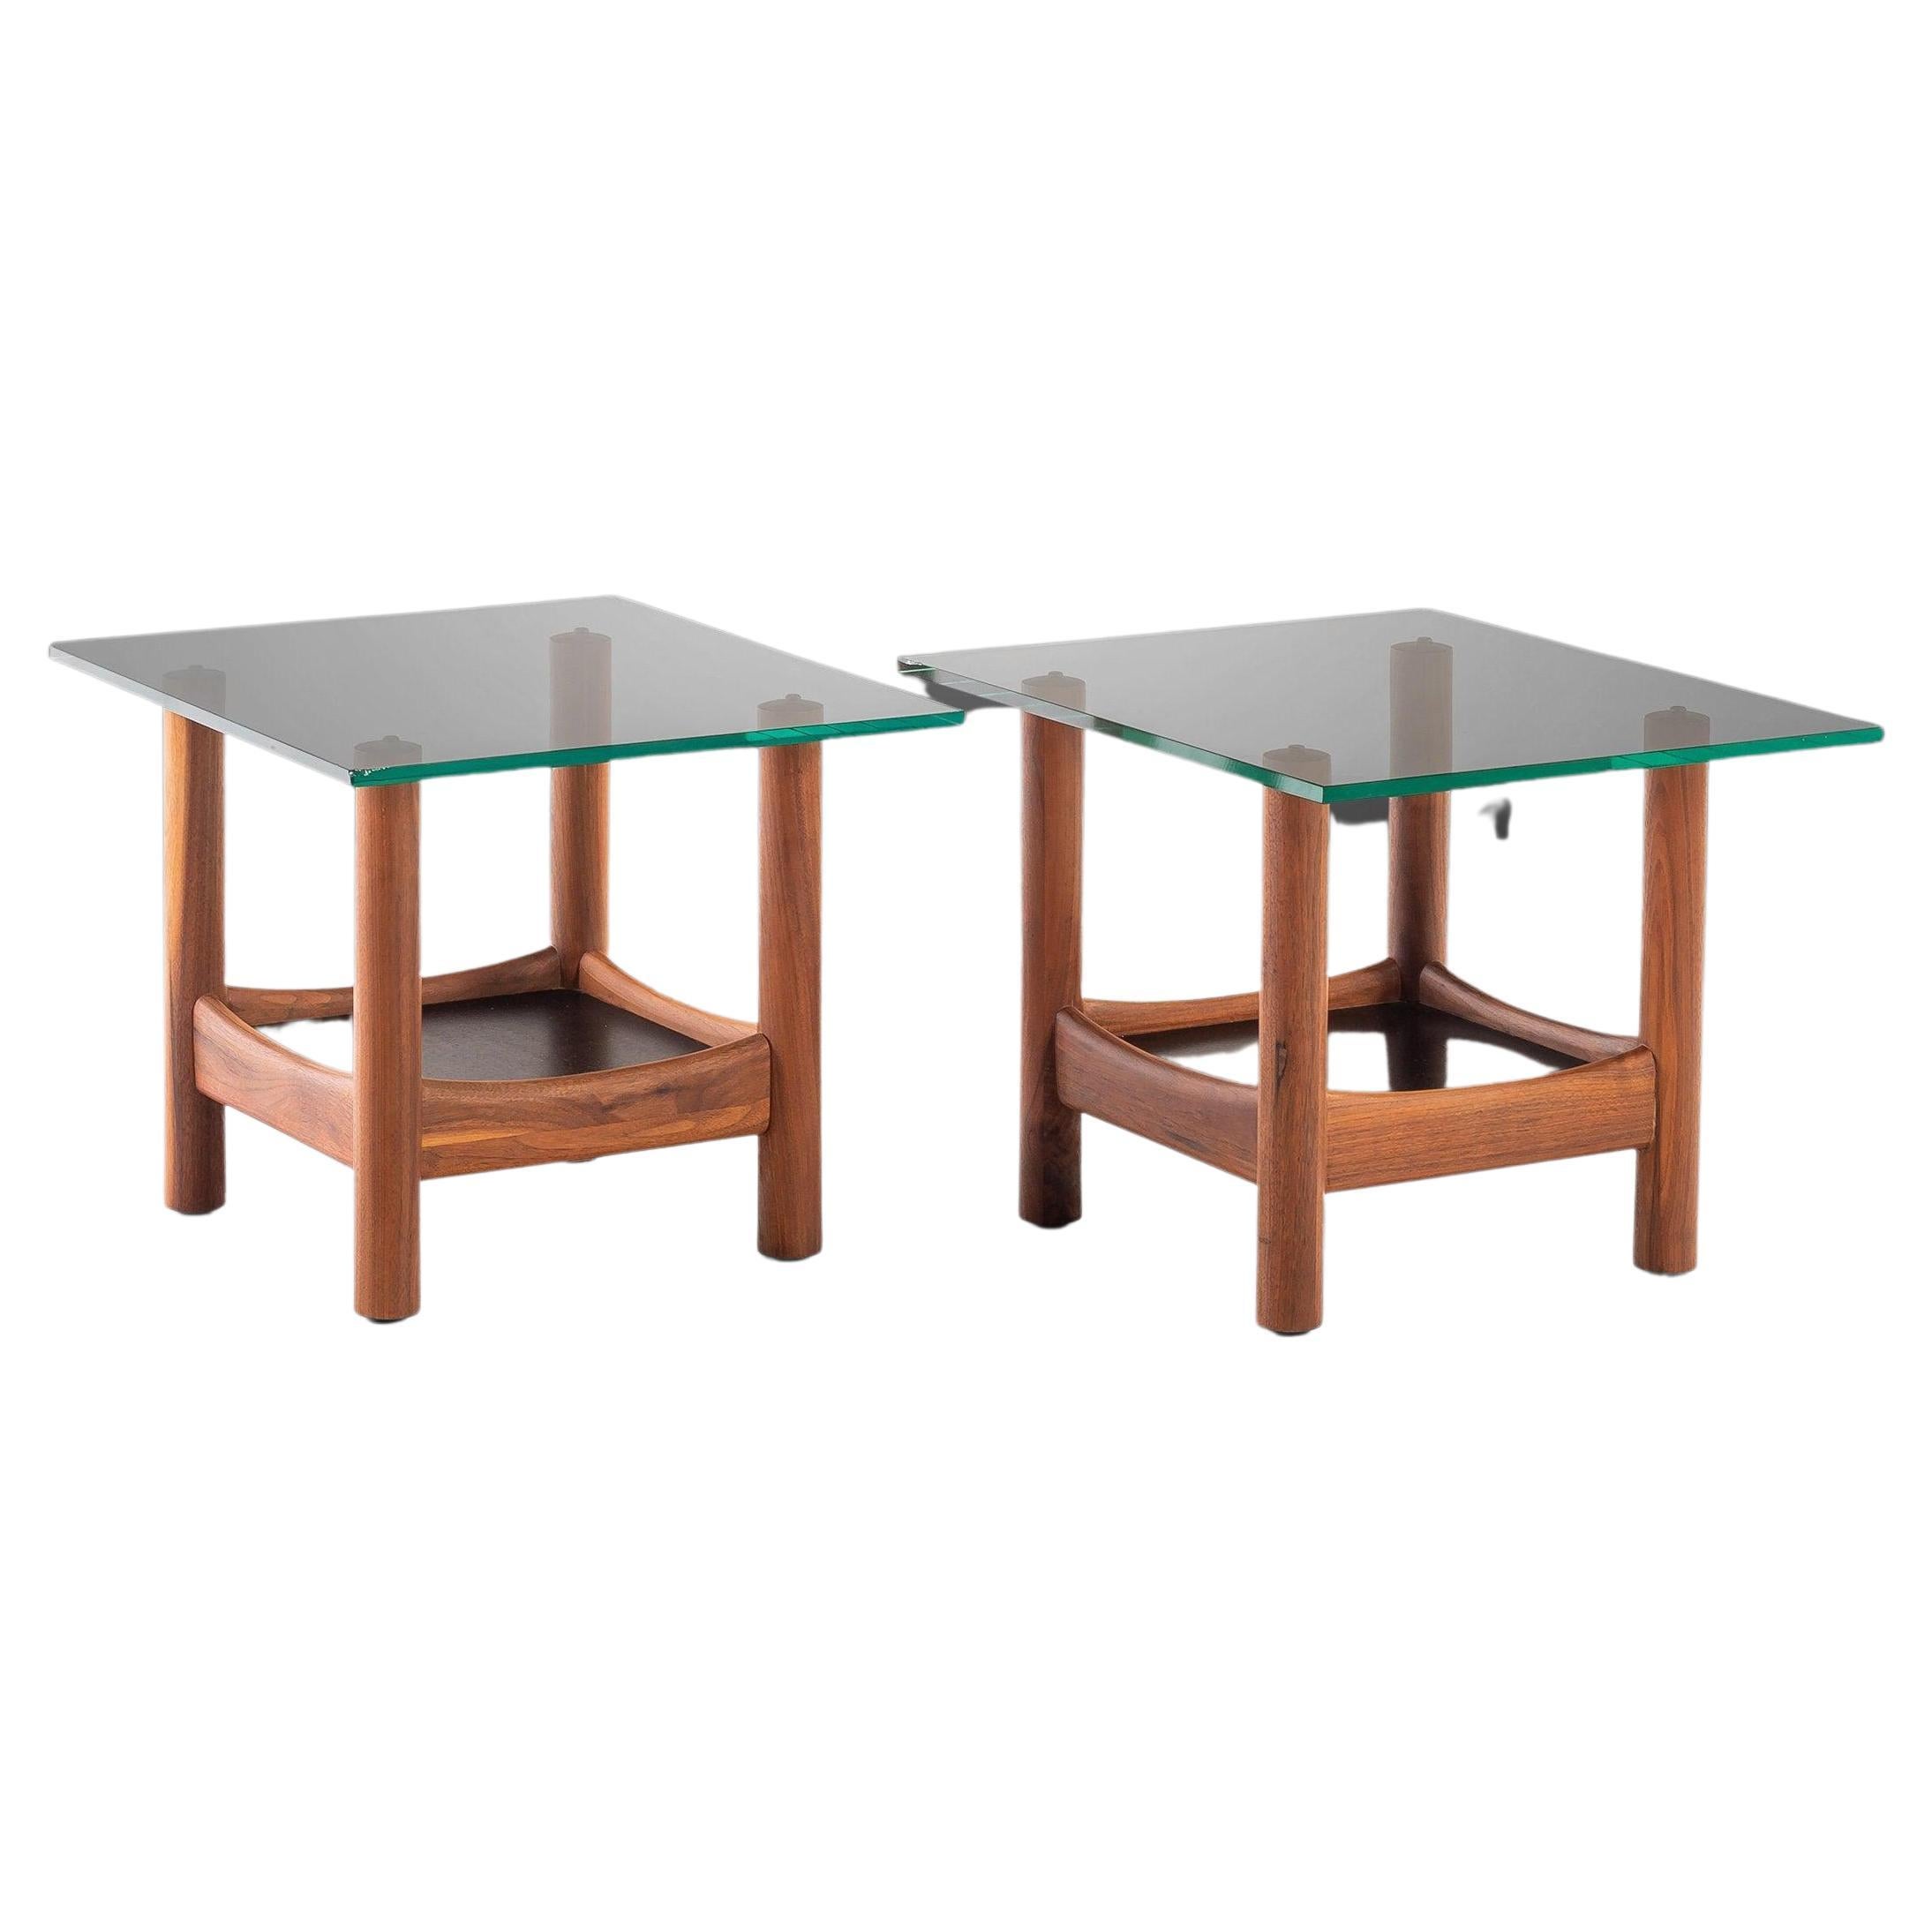 Set of Two (2) Tubular End Tables After Adrian Pearsall for Craft, c. 1960s For Sale